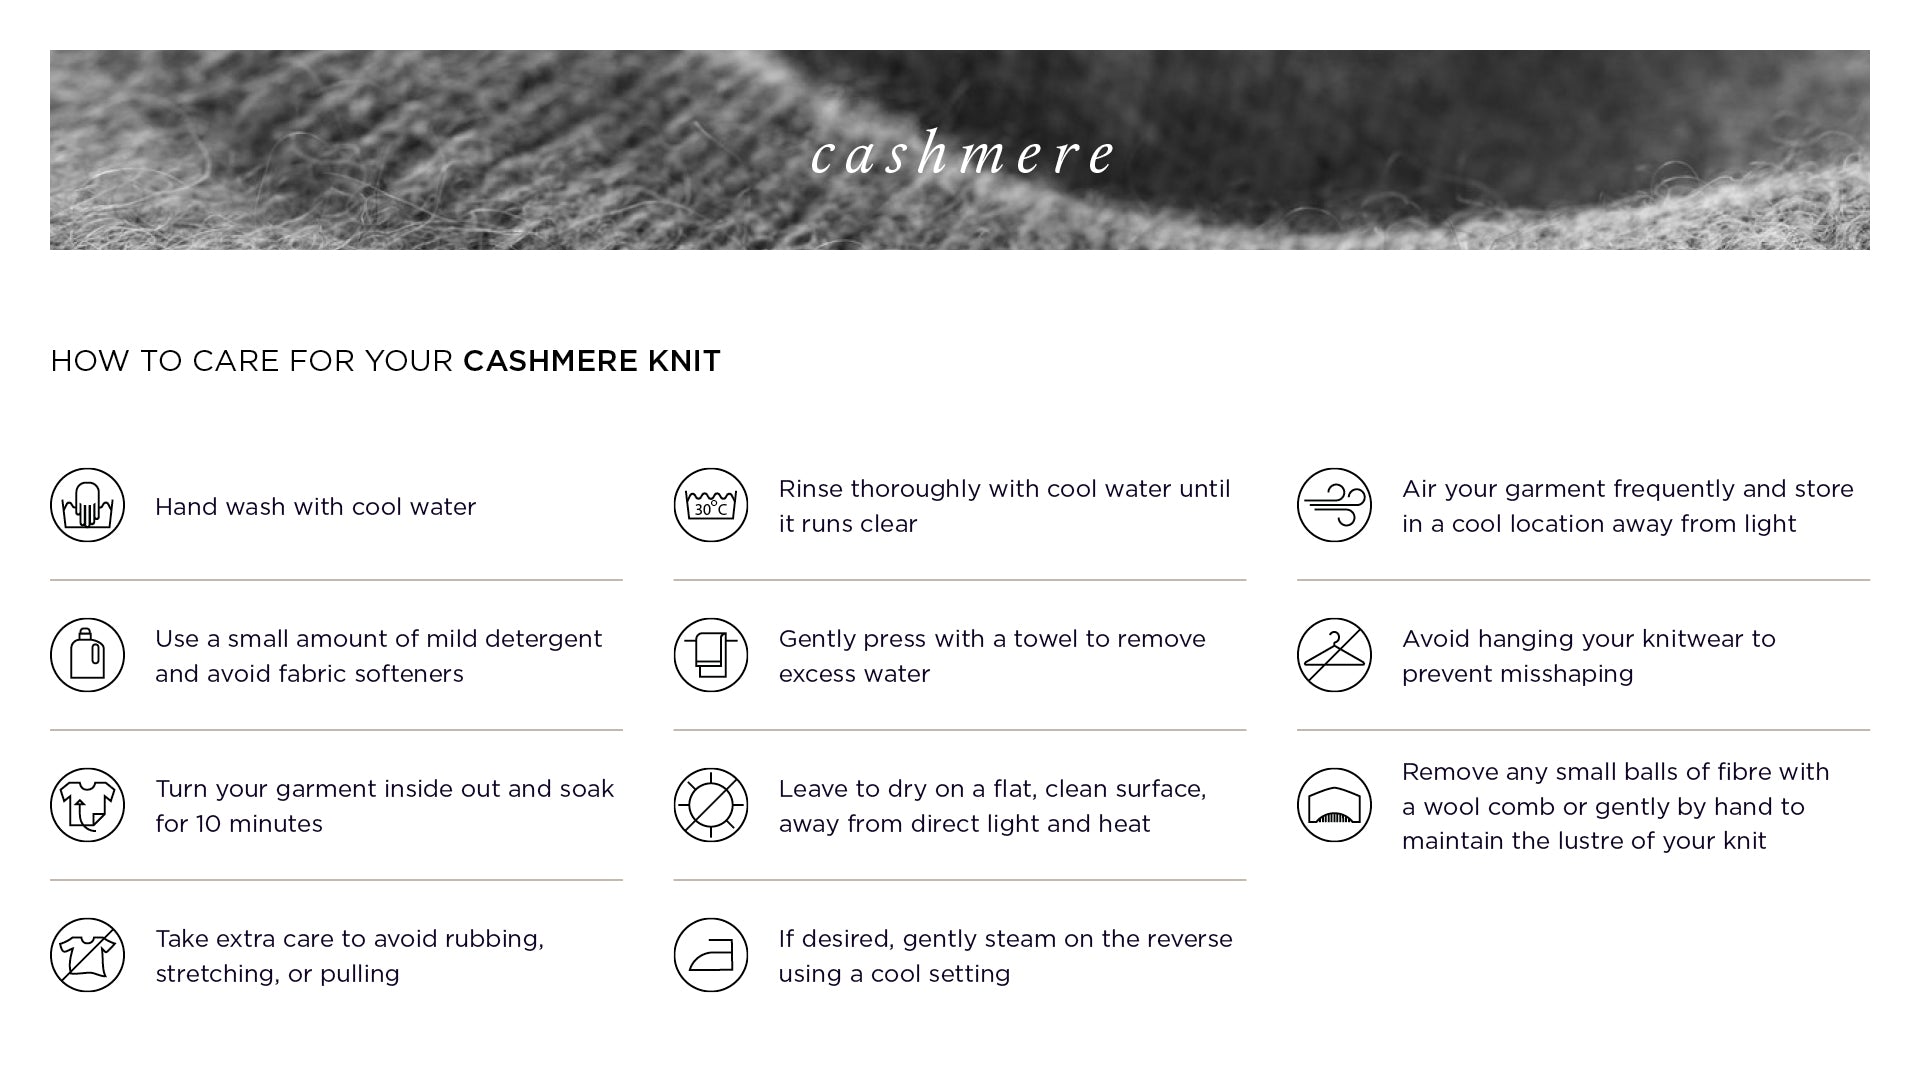 cashmere care guide for washing care